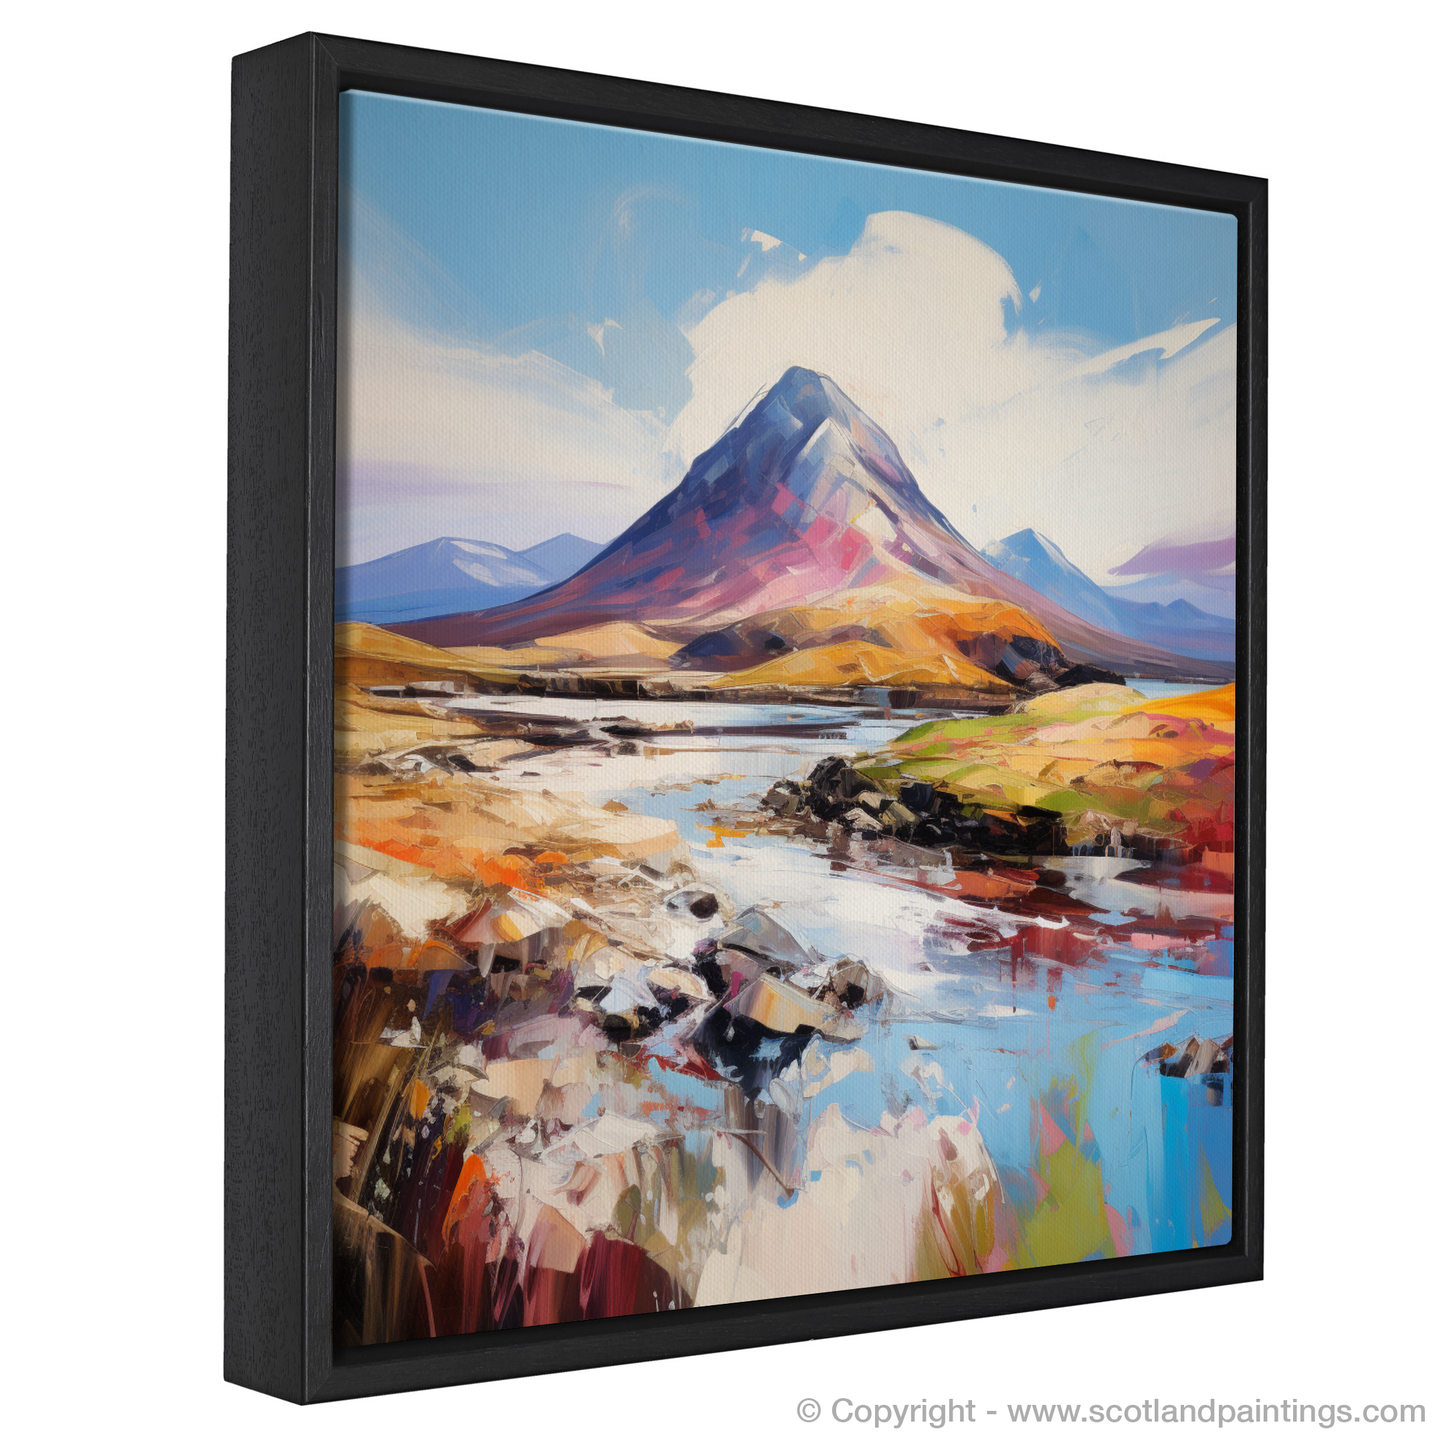 Painting and Art Print of Ben More, Isle of Mull entitled "Ben More Unleashed: An Expressionist Ode to Scotland's Wild Beauty".